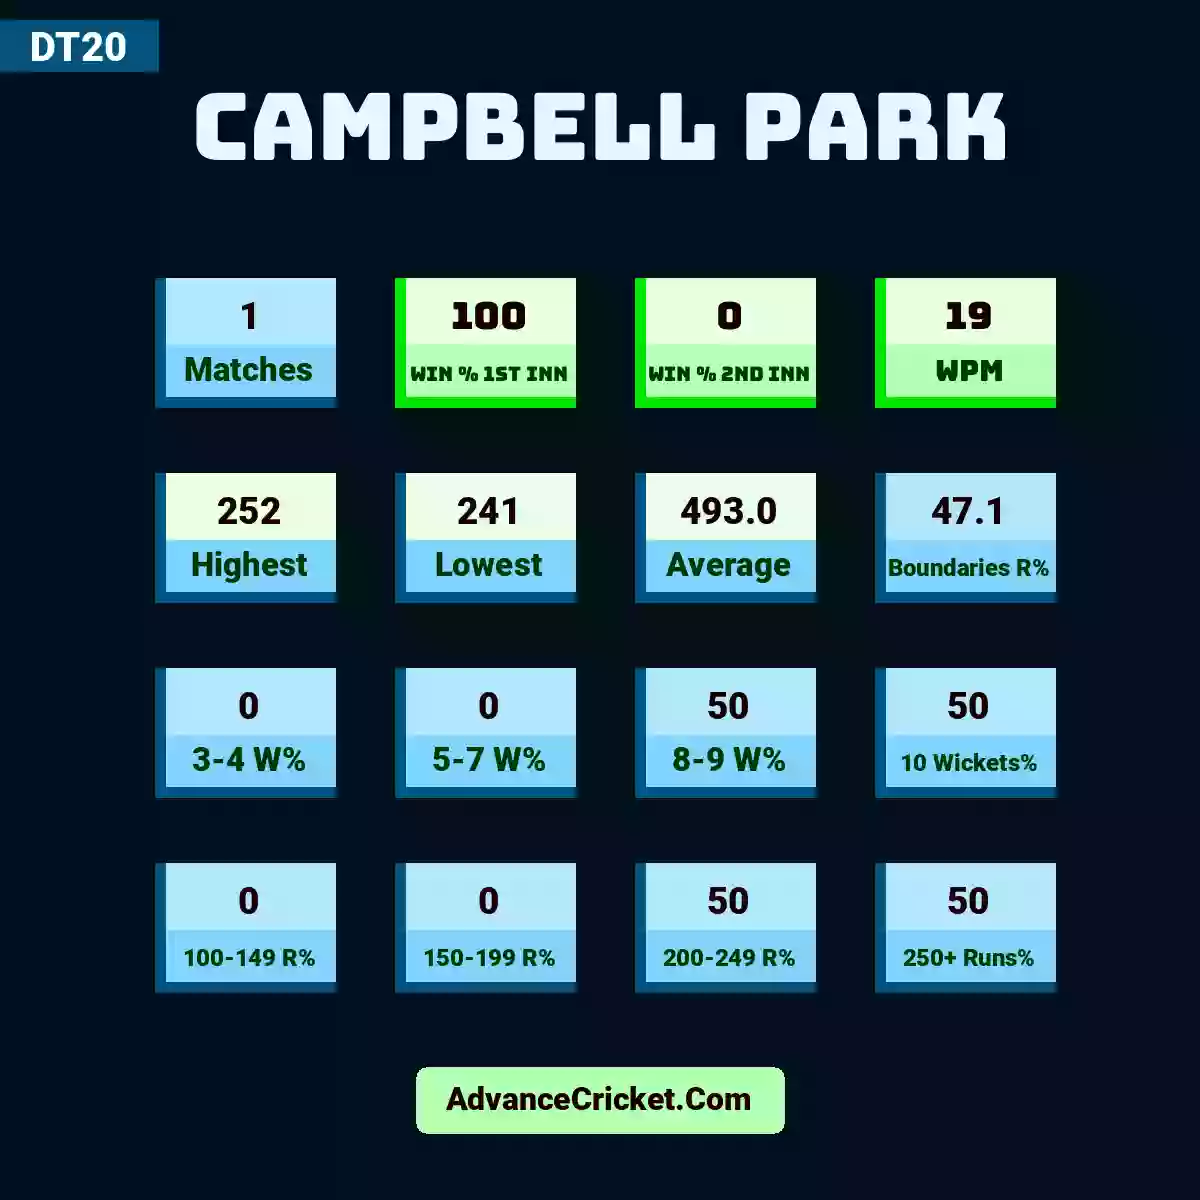 Image showing Campbell Park with Matches: 1, Win % 1st Inn: 100, Win % 2nd Inn: 0, WPM: 19, Highest: 252, Lowest: 241, Average: 493.0, Boundaries R%: 47.1, 3-4 W%: 0, 5-7 W%: 0, 8-9 W%: 50, 10 Wickets%: 50, 100-149 R%: 0, 150-199 R%: 0, 200-249 R%: 50, 250+ Runs%: 50.